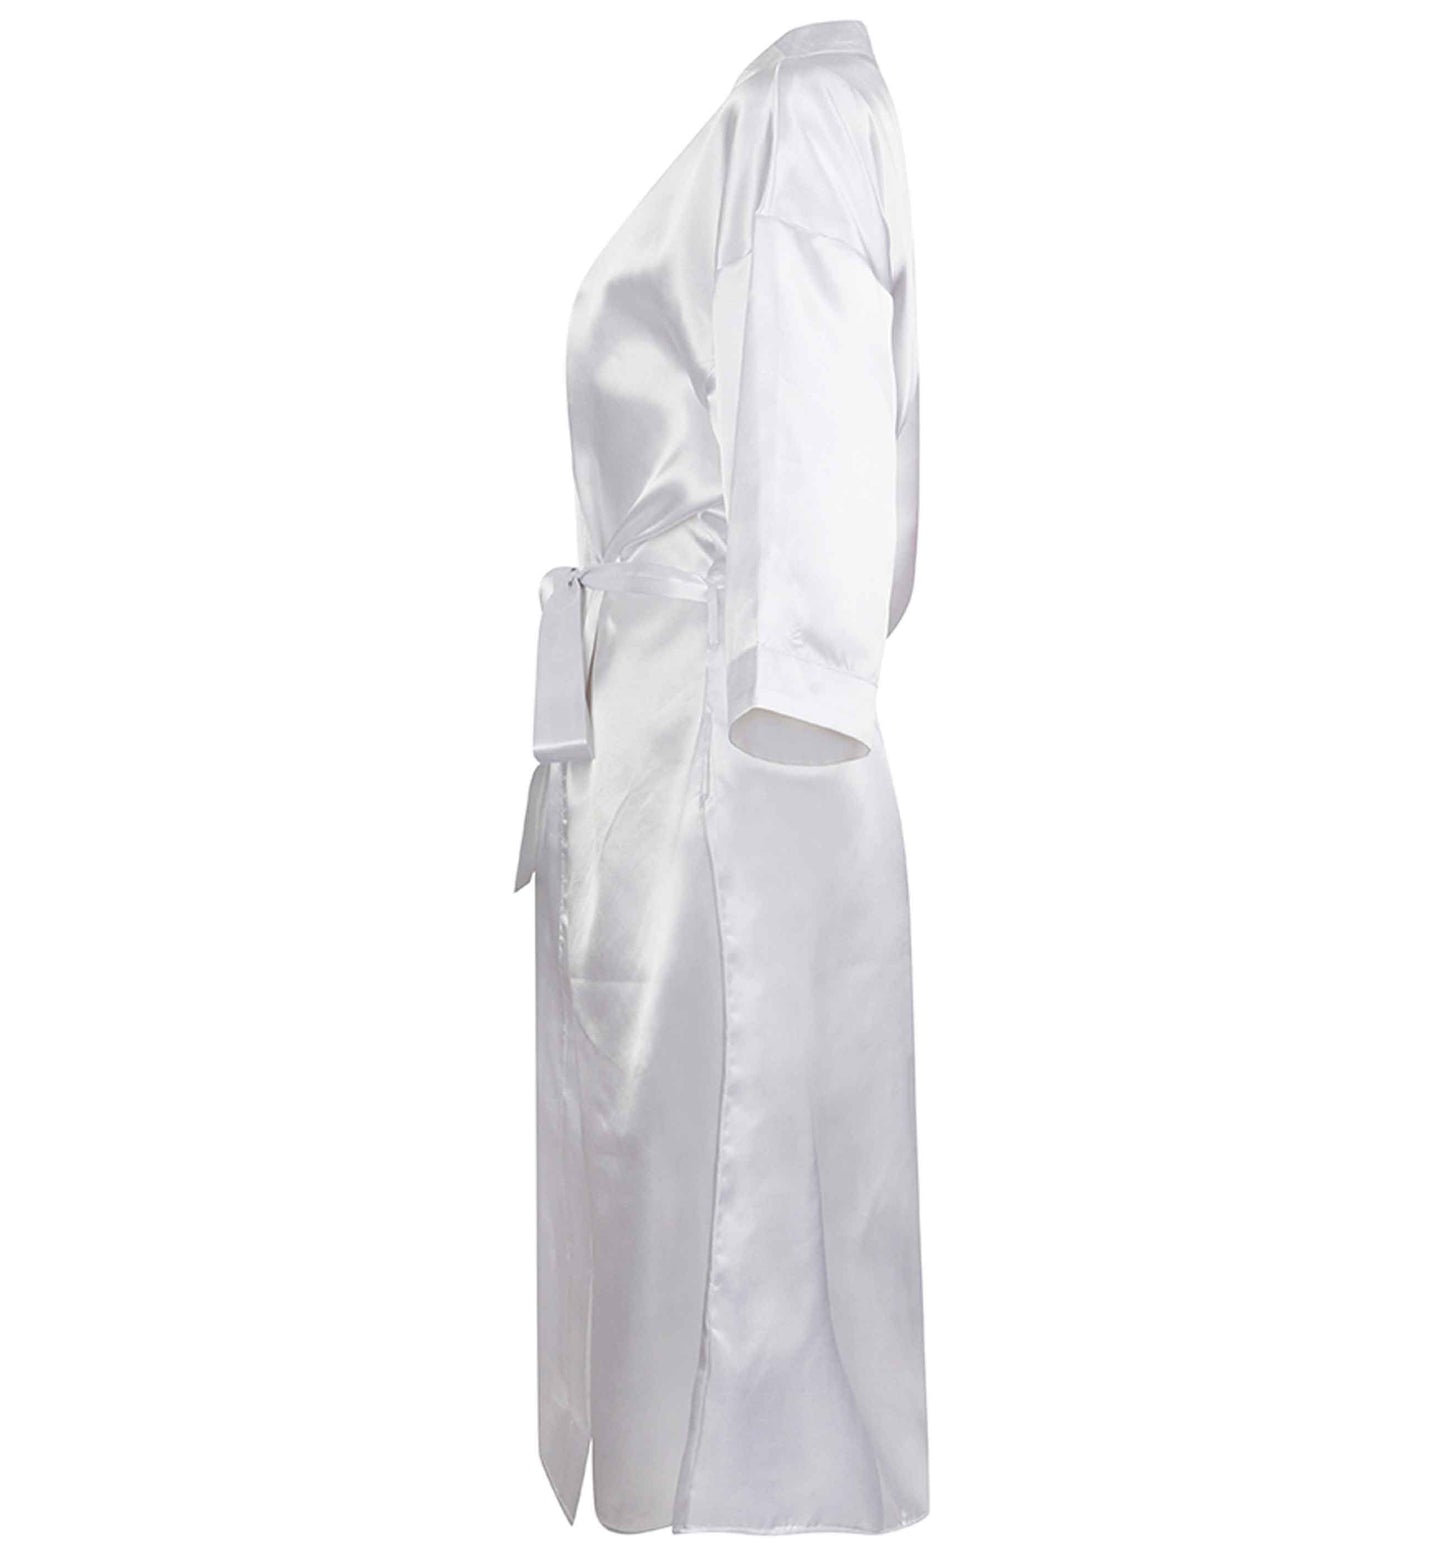 Having a drink or two before I say I do | 8-18 | Kimono style satin robe | Ladies dressing gown